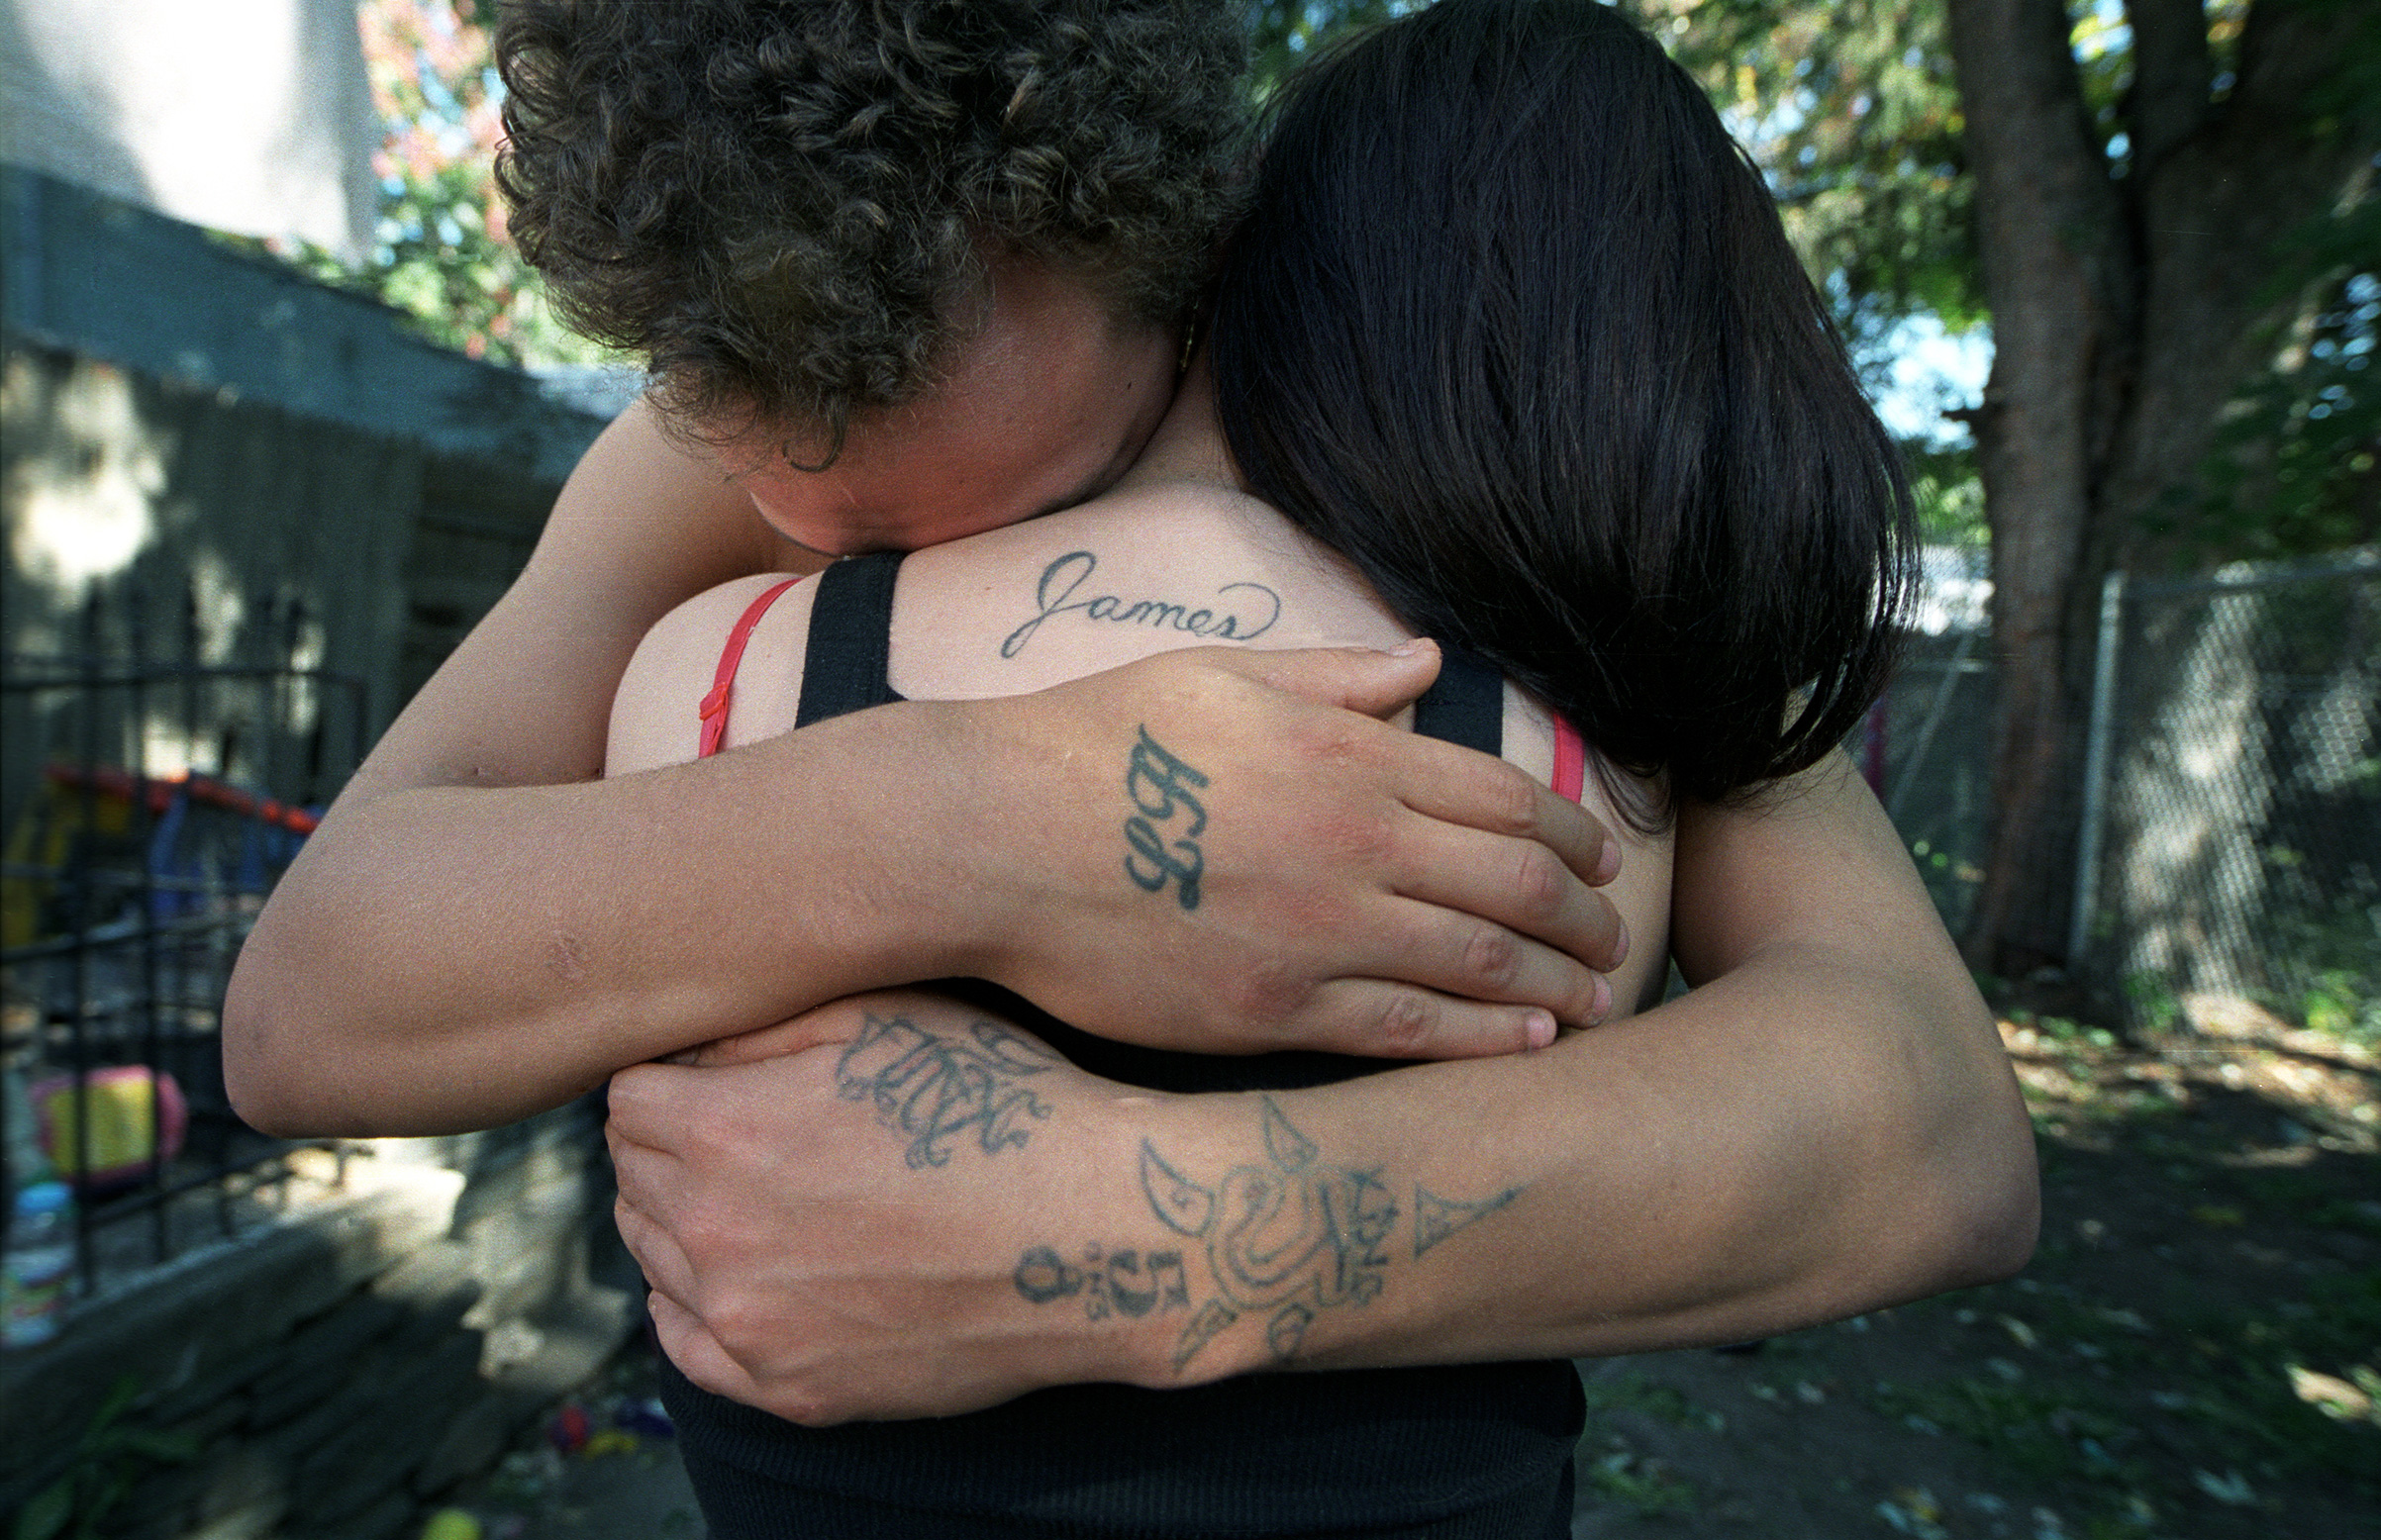 James Miles hugs Kayla while he's AWOL from rehab in 2007," says Kenneally. (Brenda Ann Kenneally")